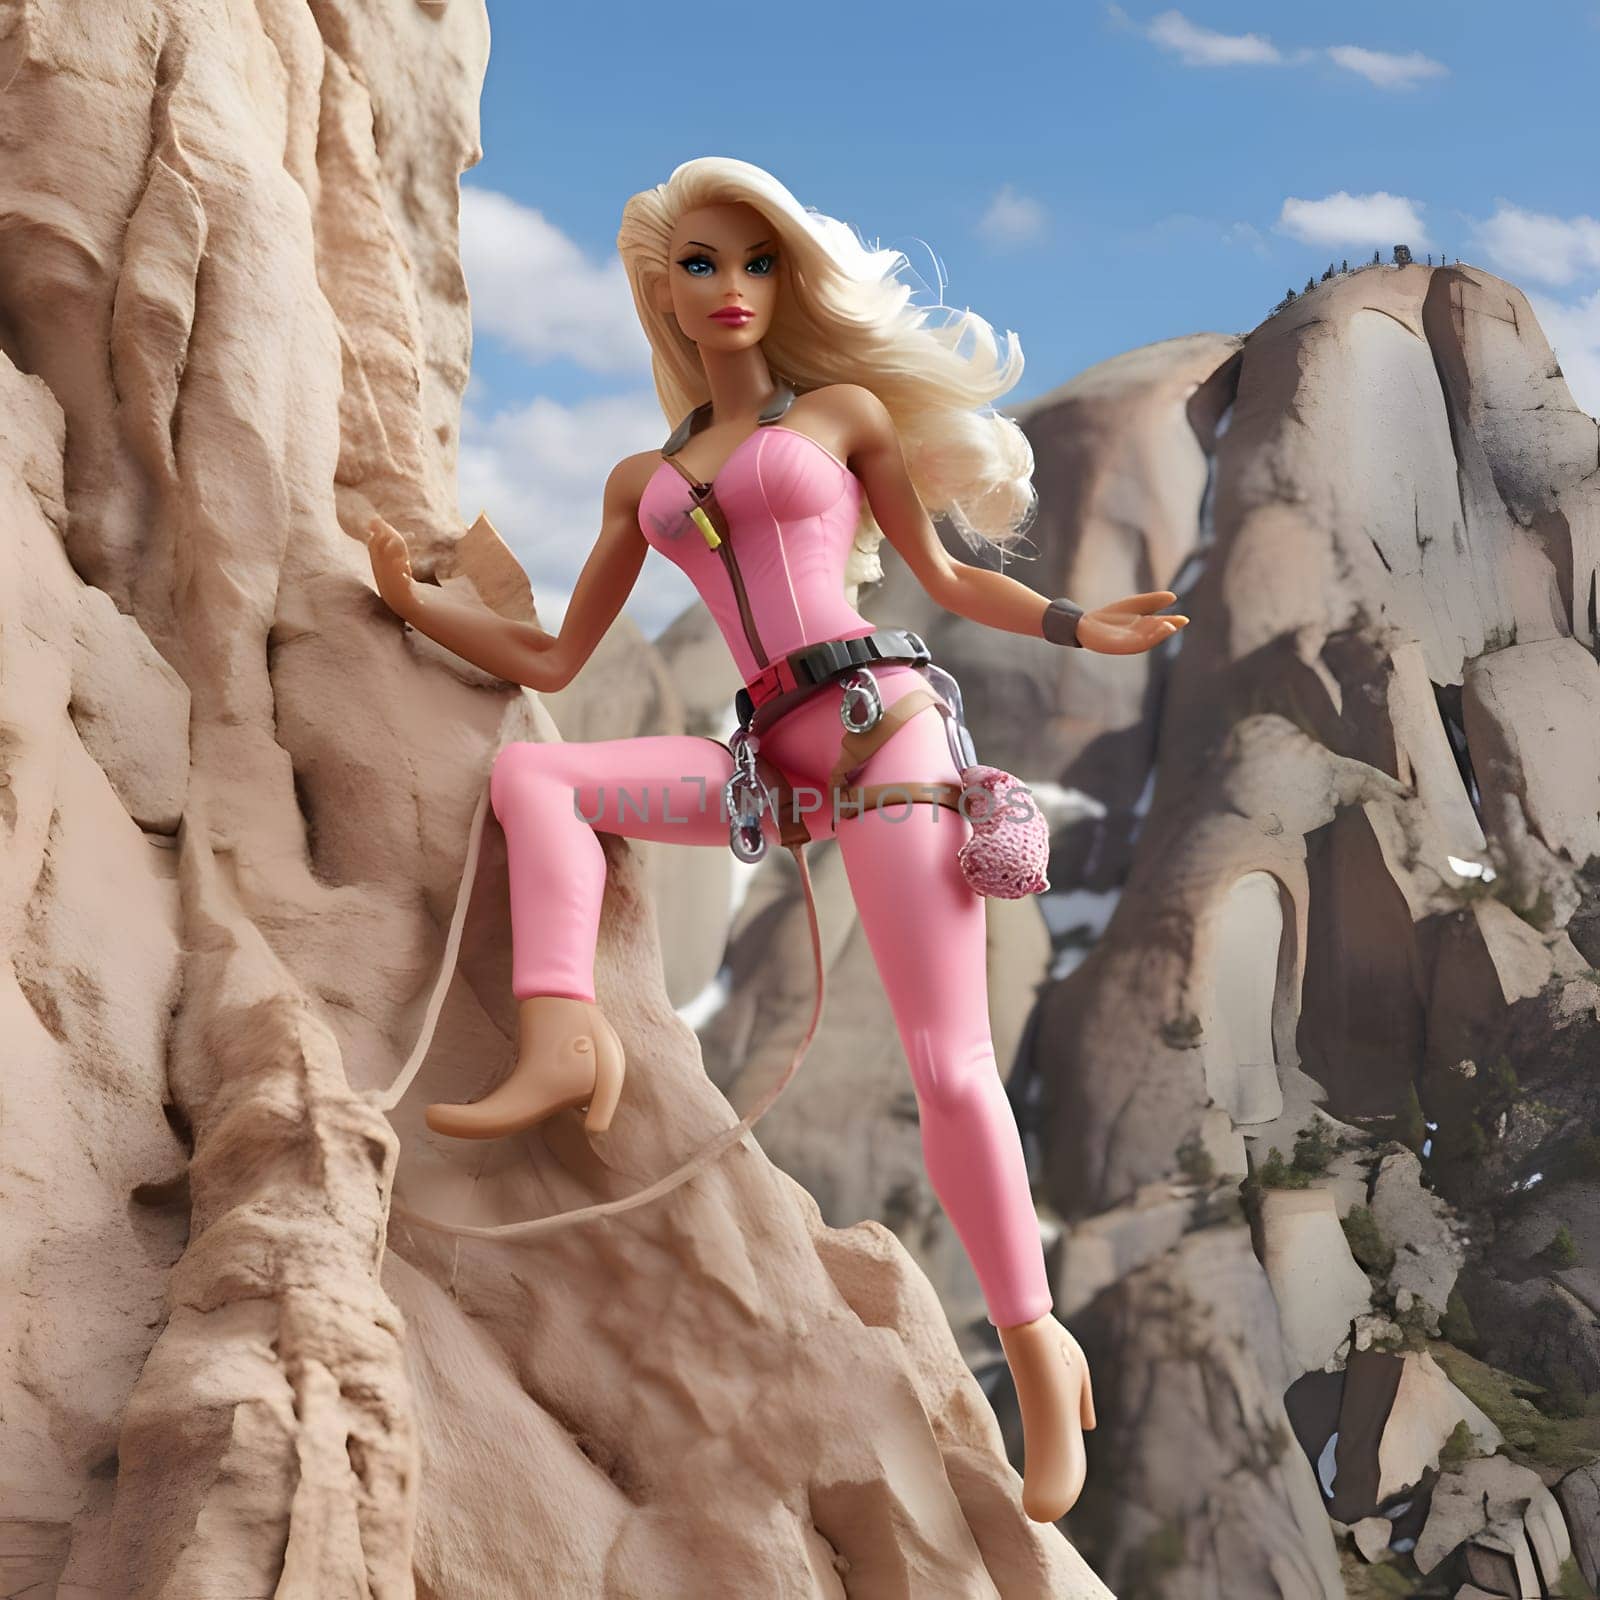 Cute blonde Barbie wearing pink outfit, climbs, against blurred mountains background. by ThemesS